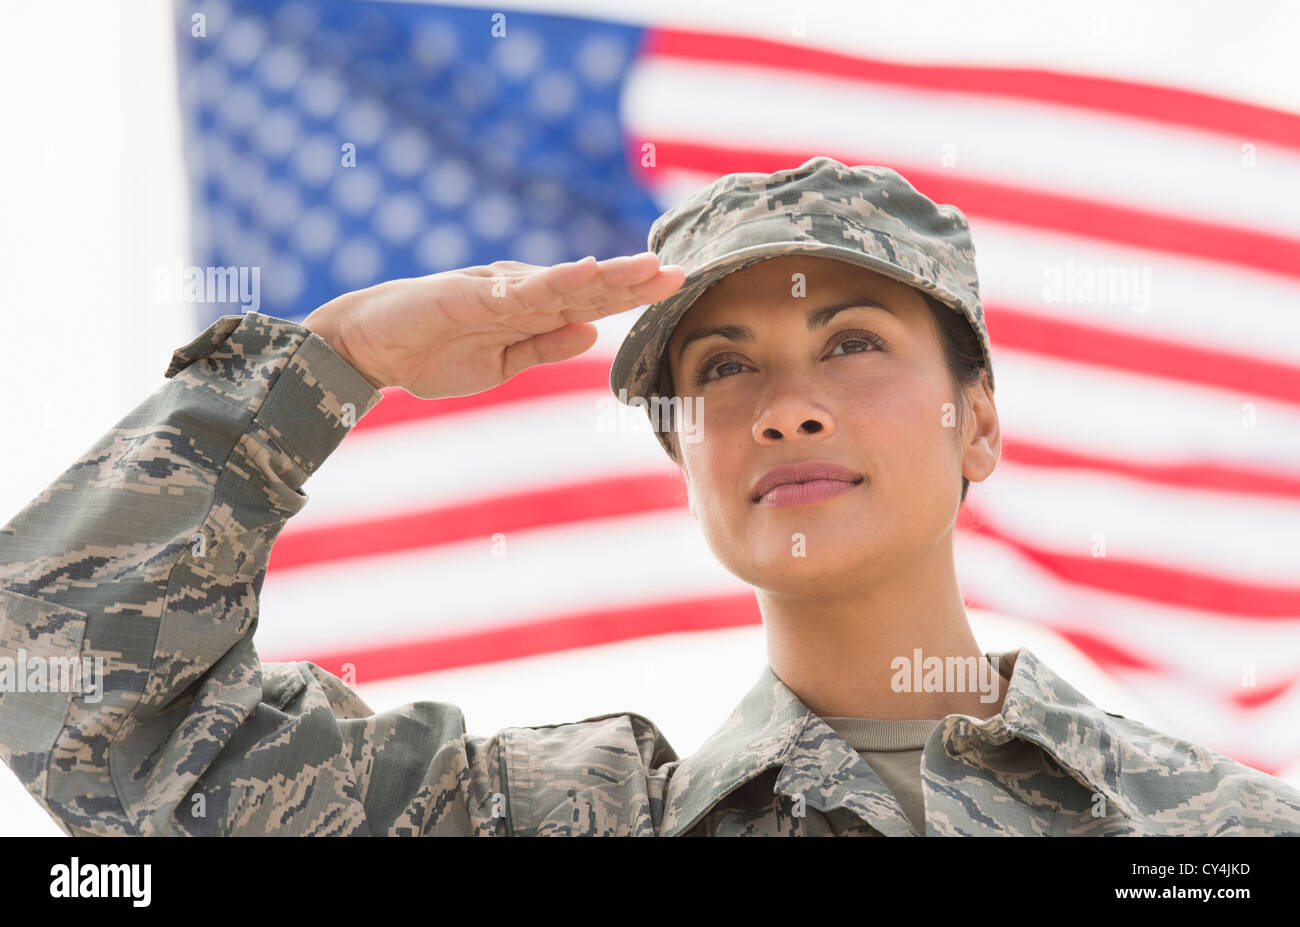 USA, New Jersey, Jersey City, Female army soldier saluting, American flag in background Stock Photo